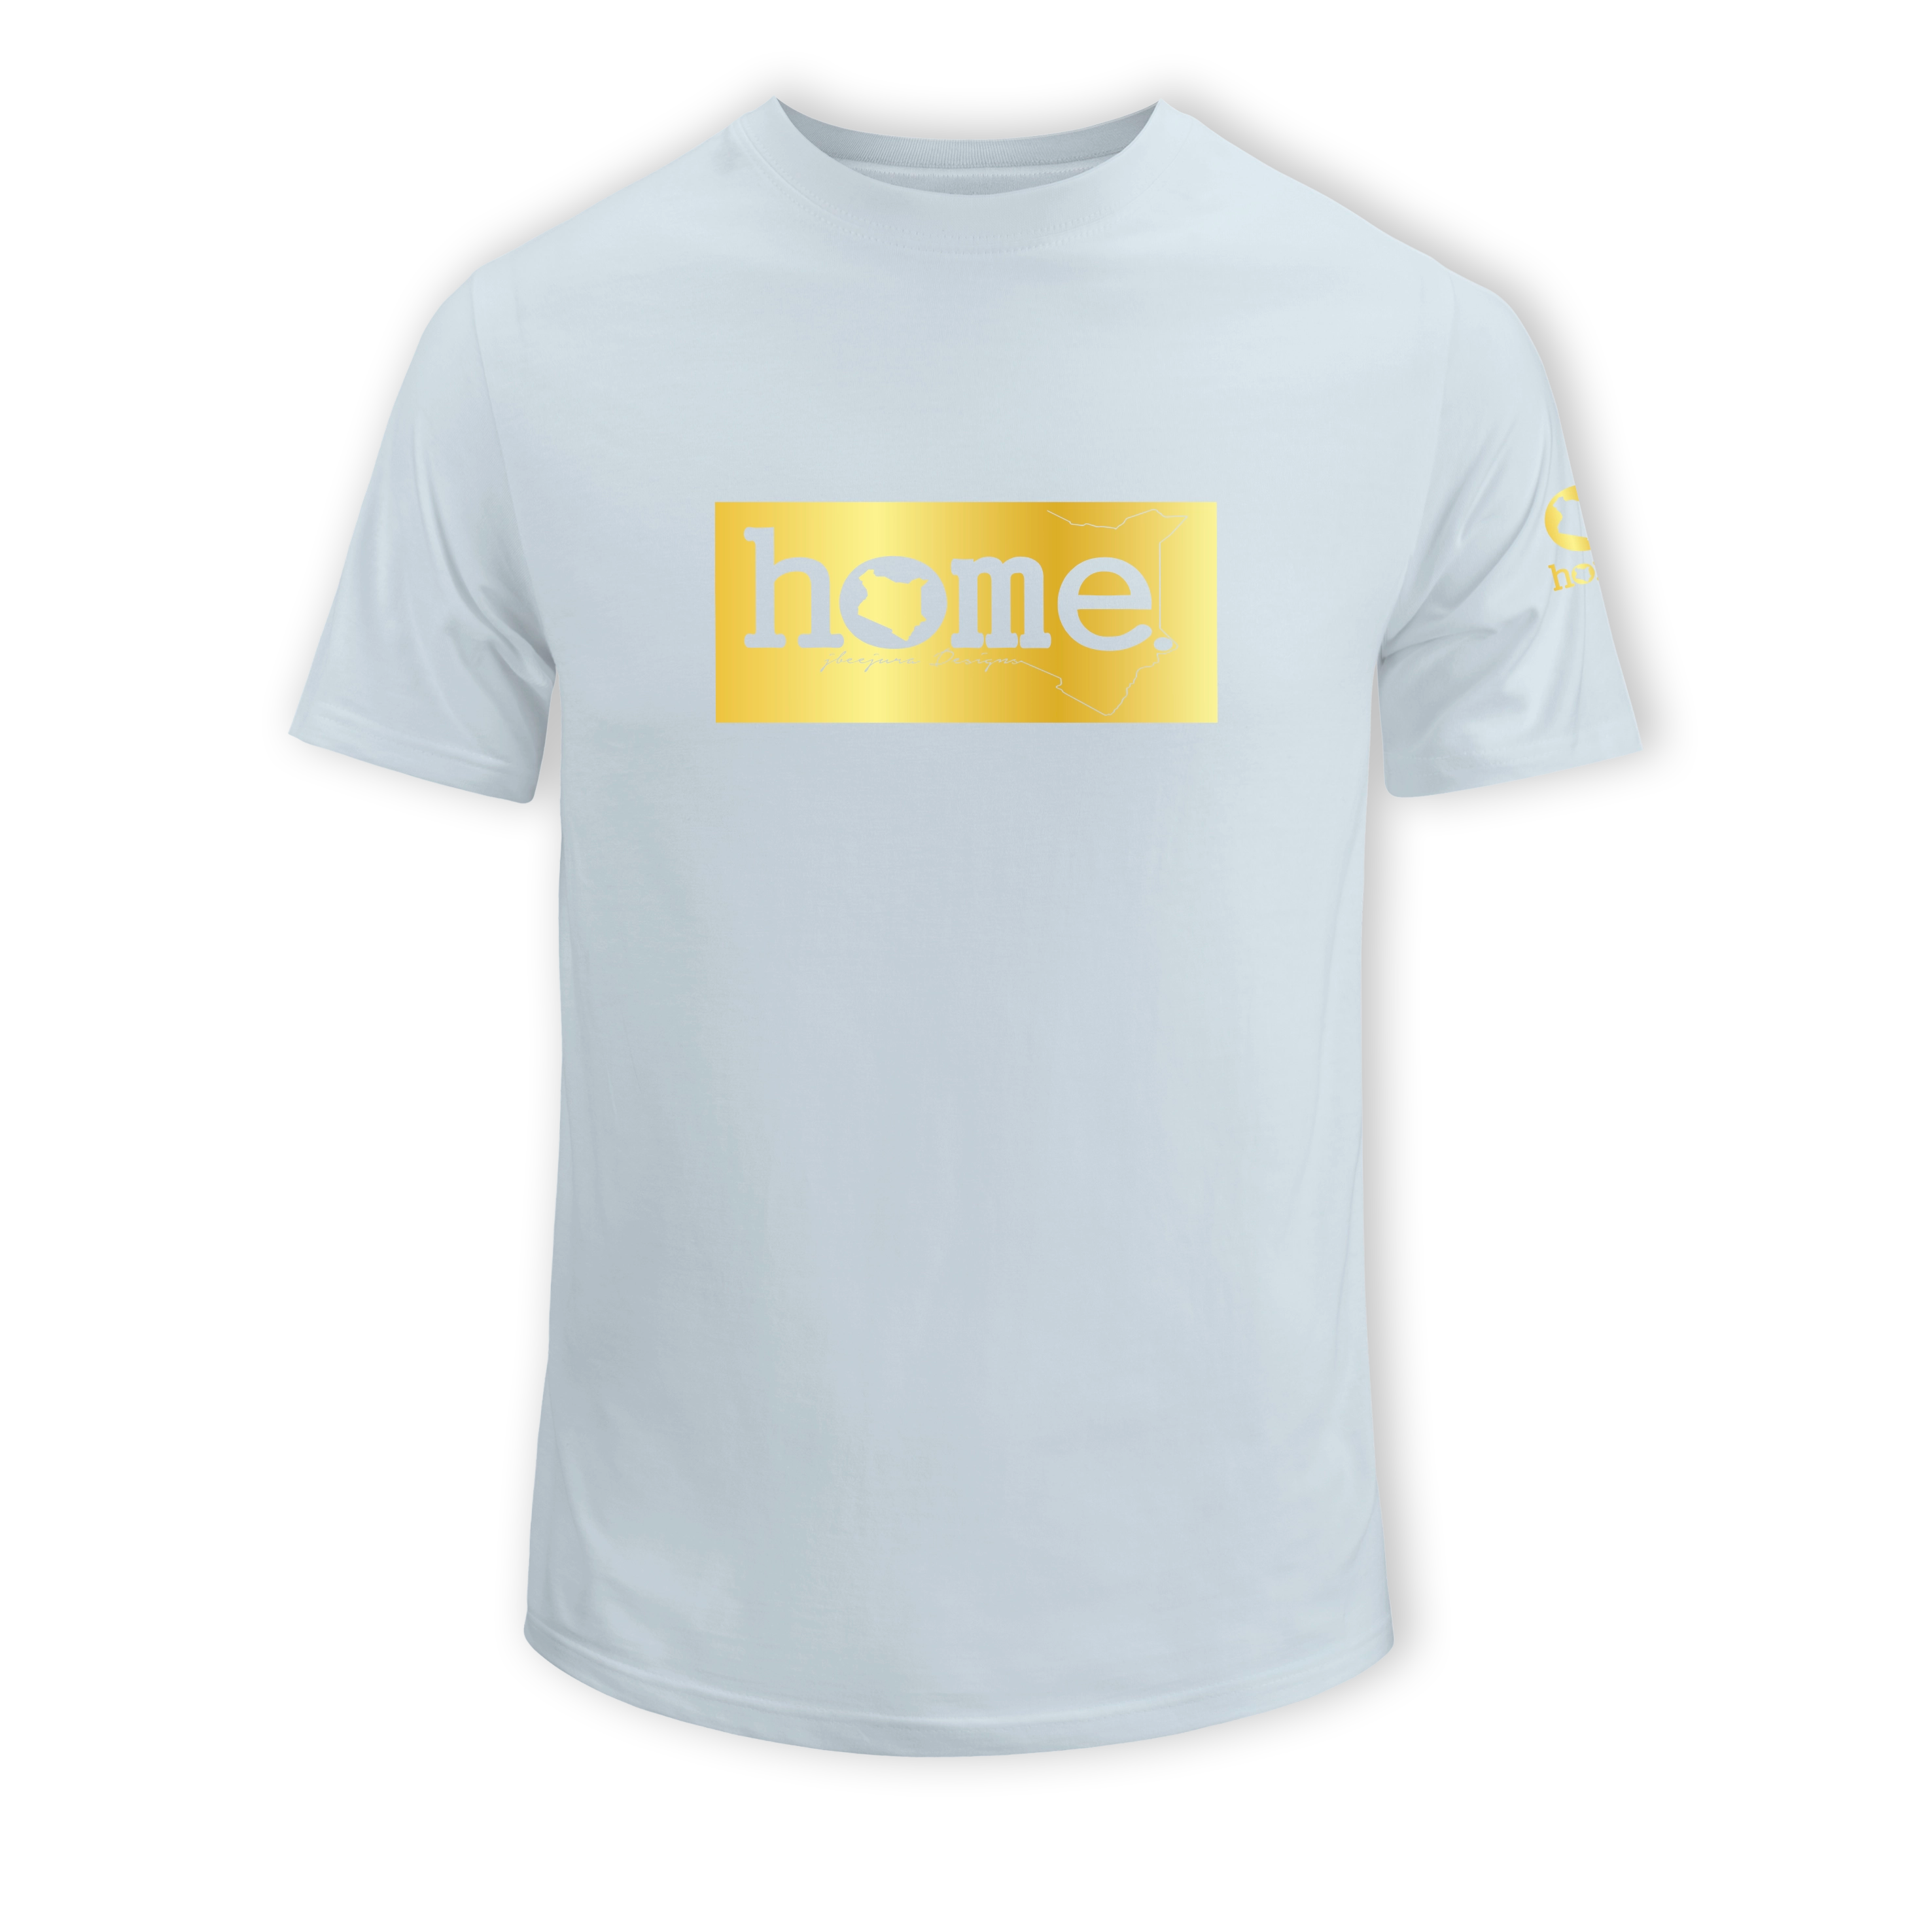 home_254 SHORT-SLEEVED SKY-BLUE T-SHIRT WITH A GOLD CLASSIC PRINT – COTTON PLUS FABRIC